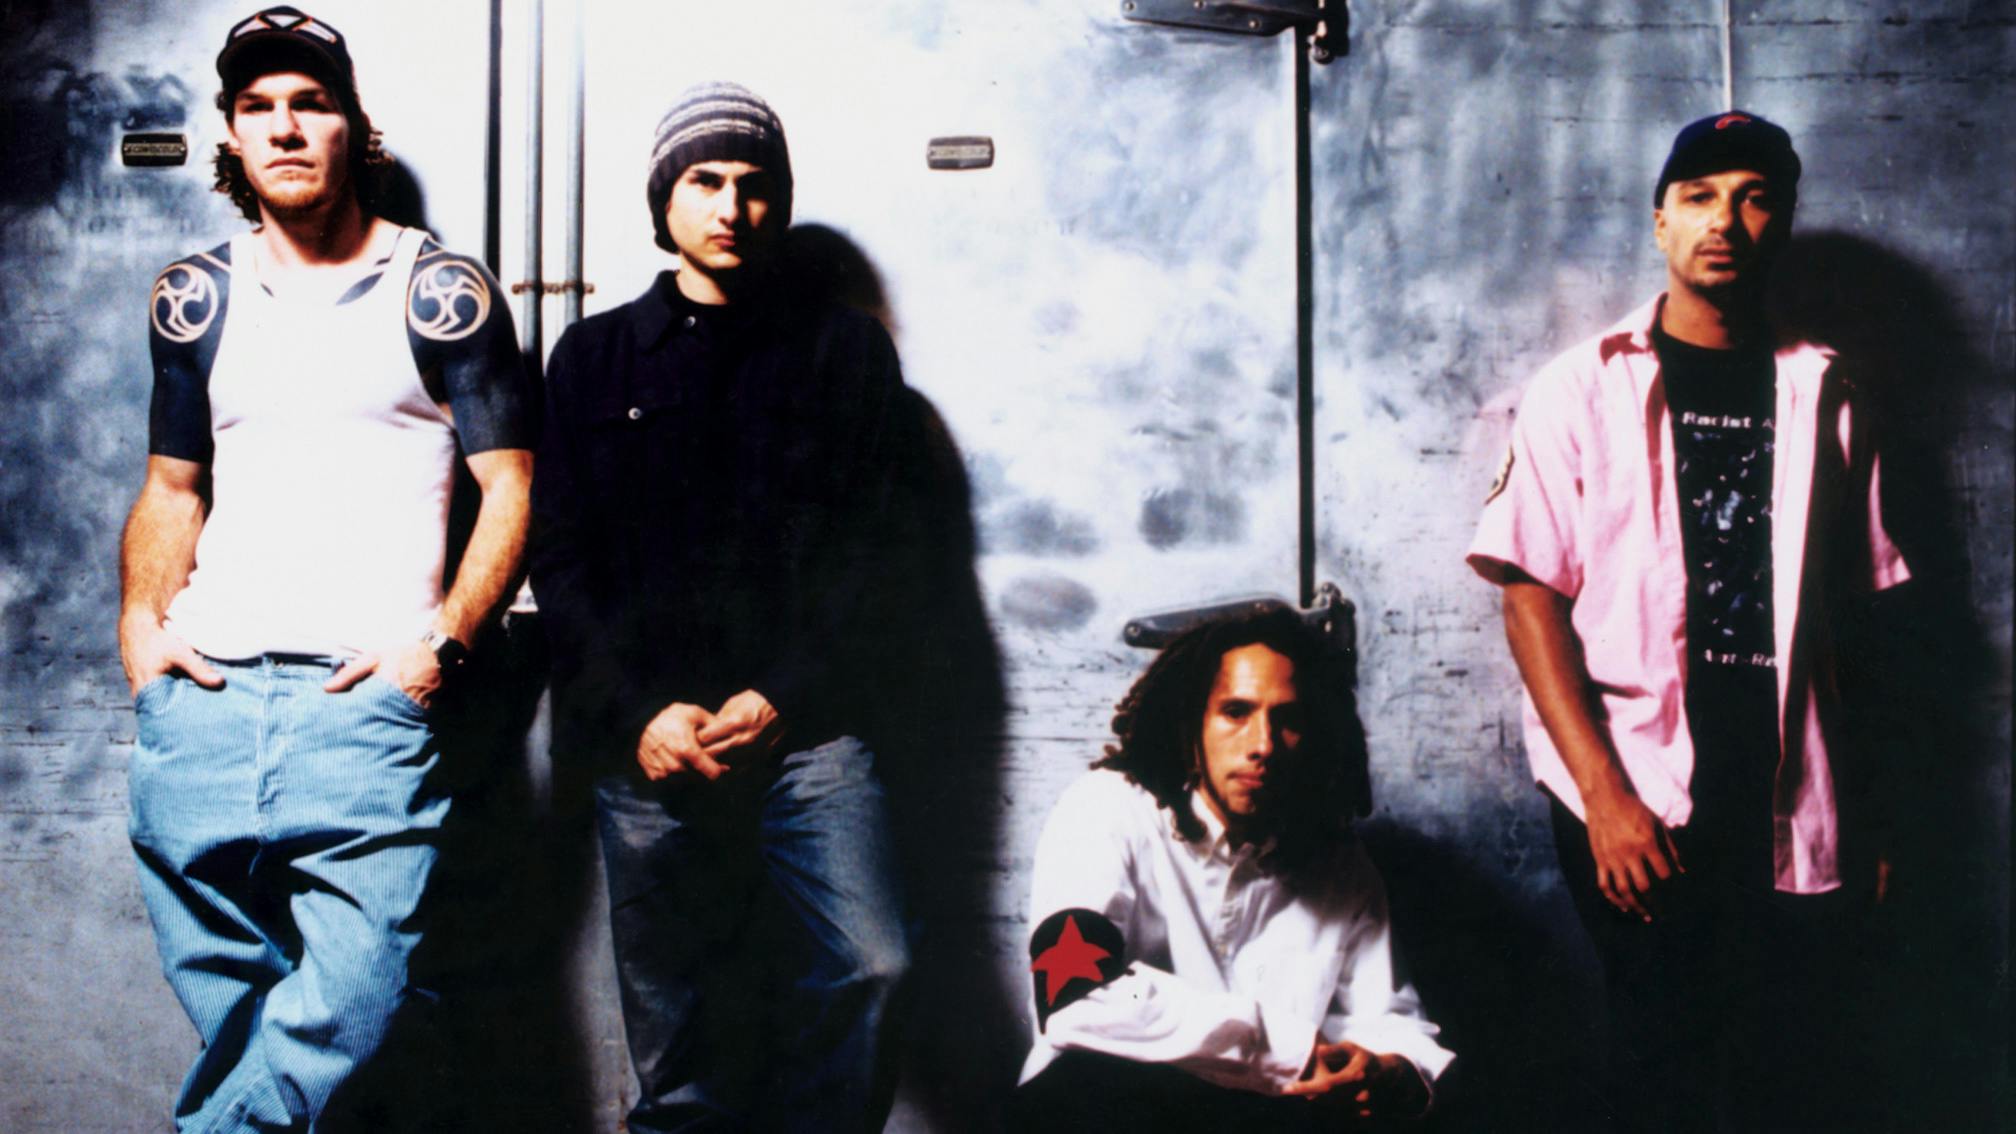 It’s official: Rage Against The Machine “will not be touring or playing live again”